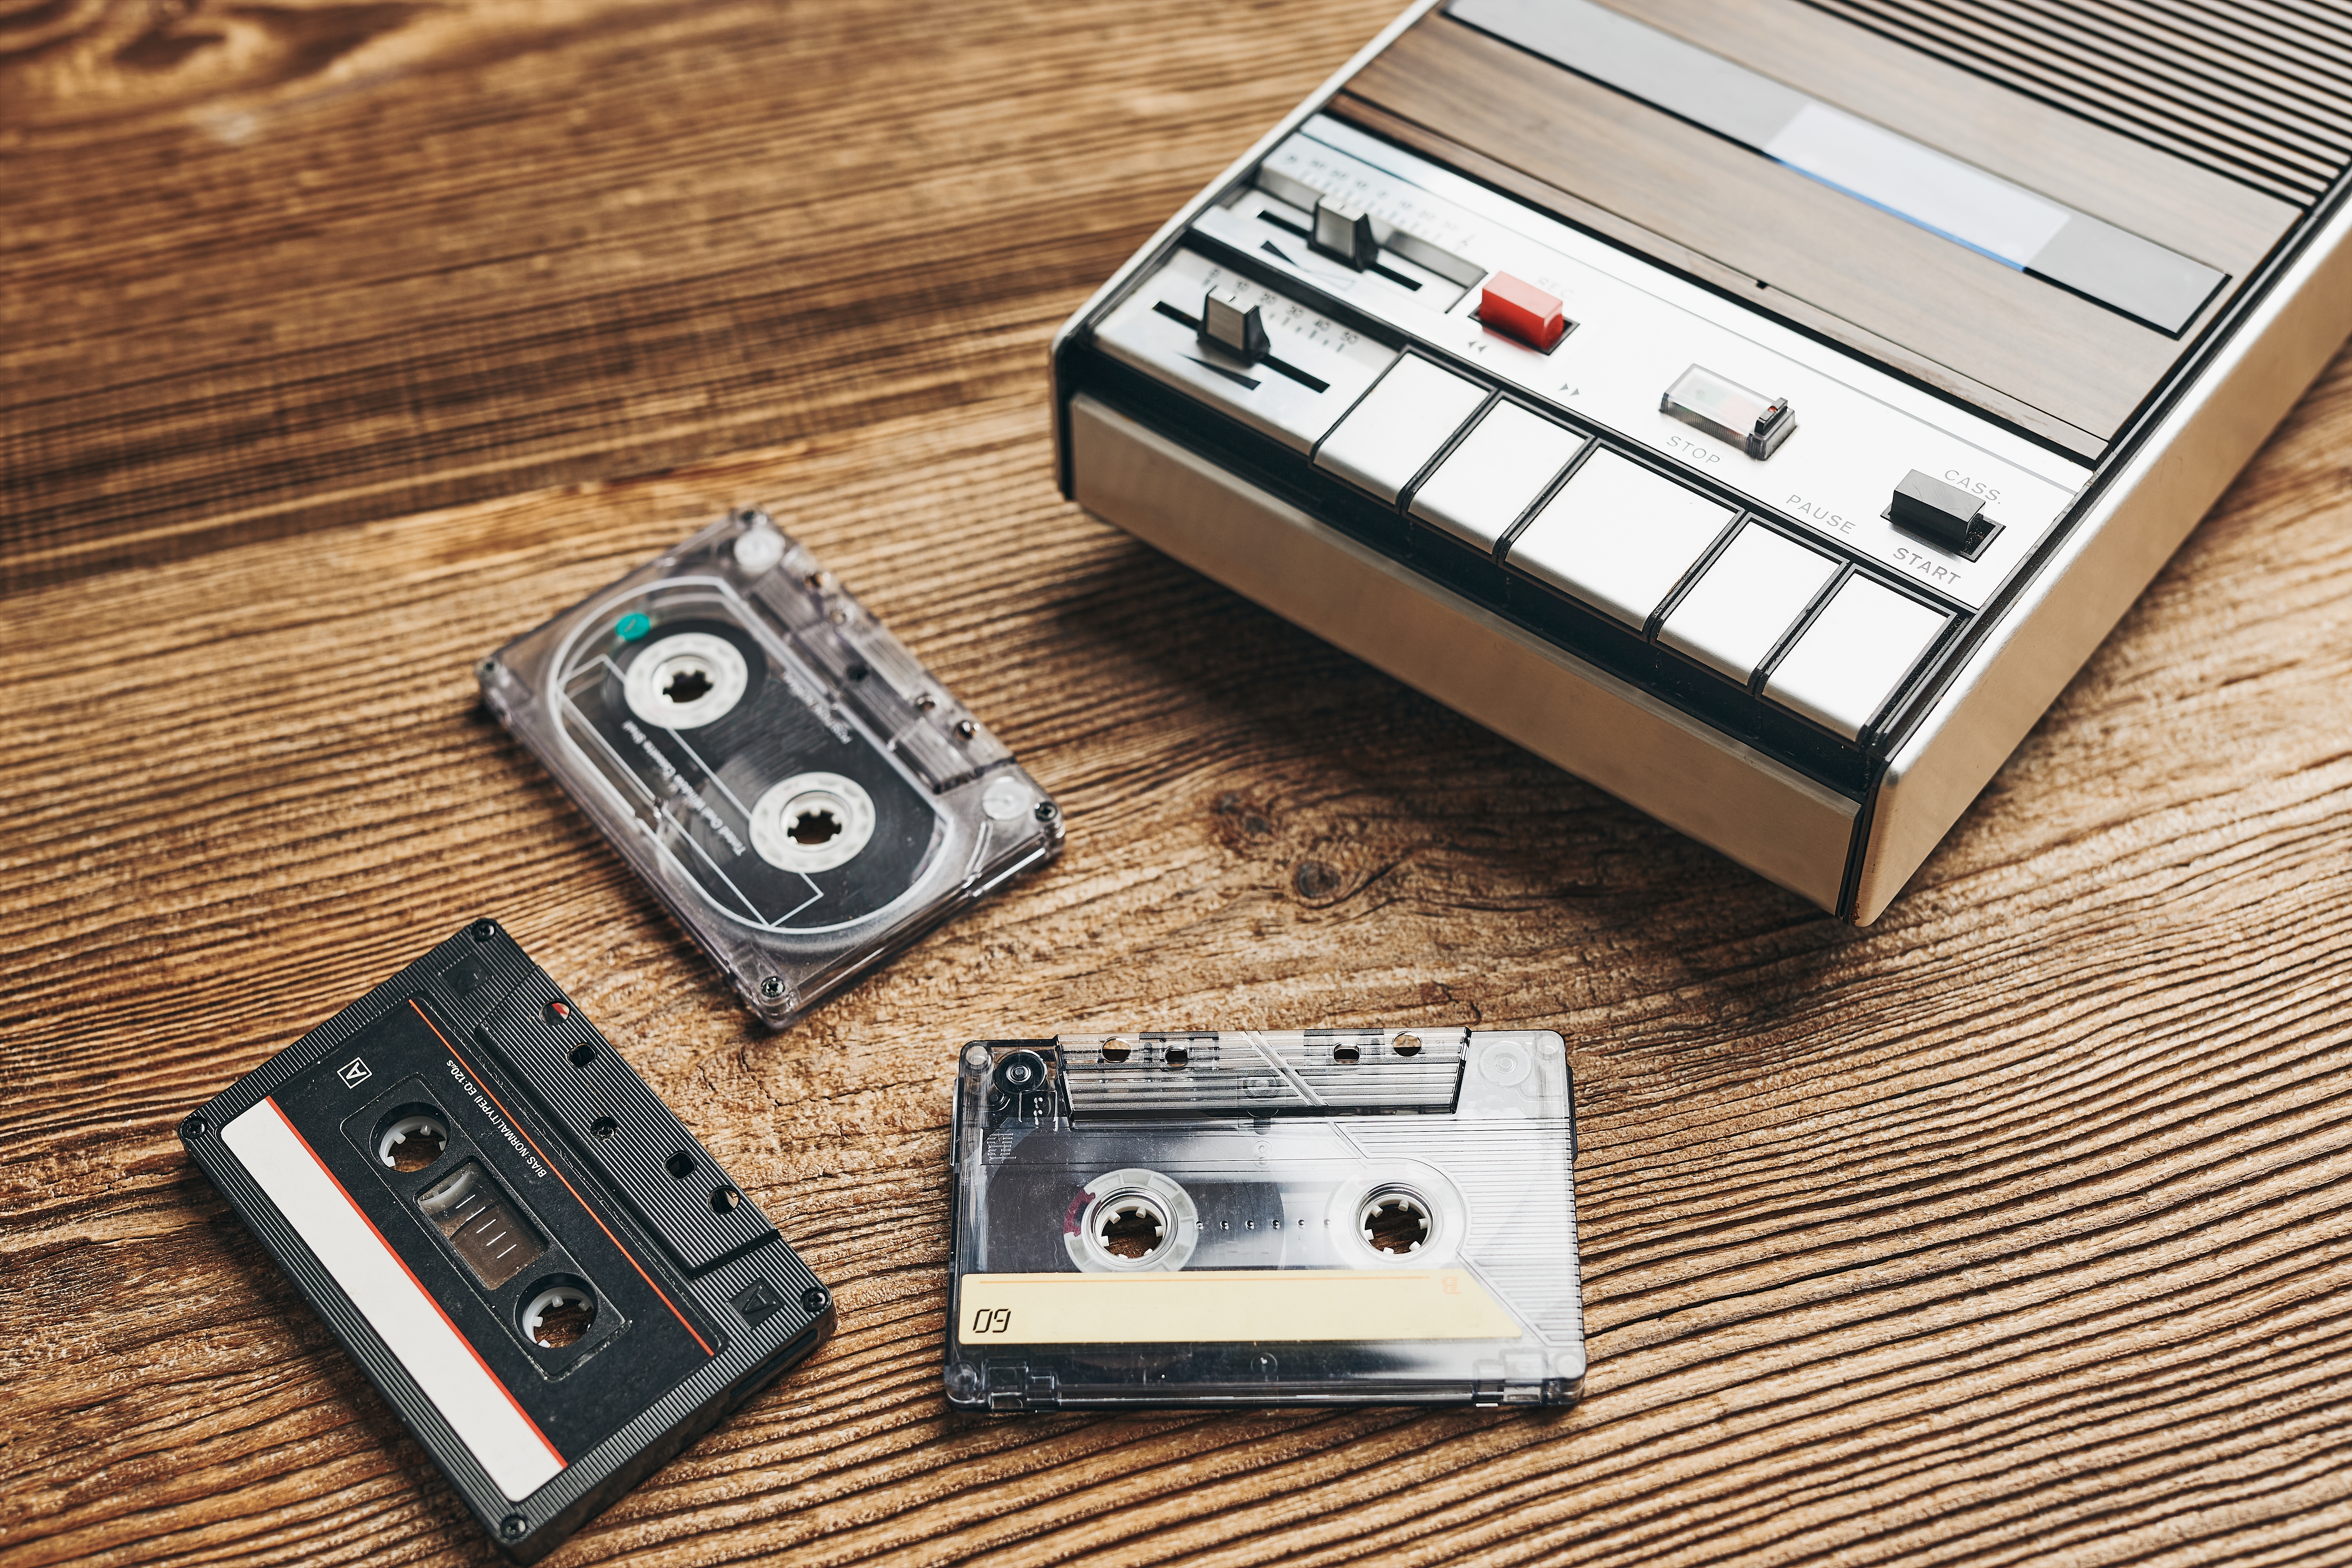 Compact cassette tapes and a cassette recorder | Source: Shutterstock